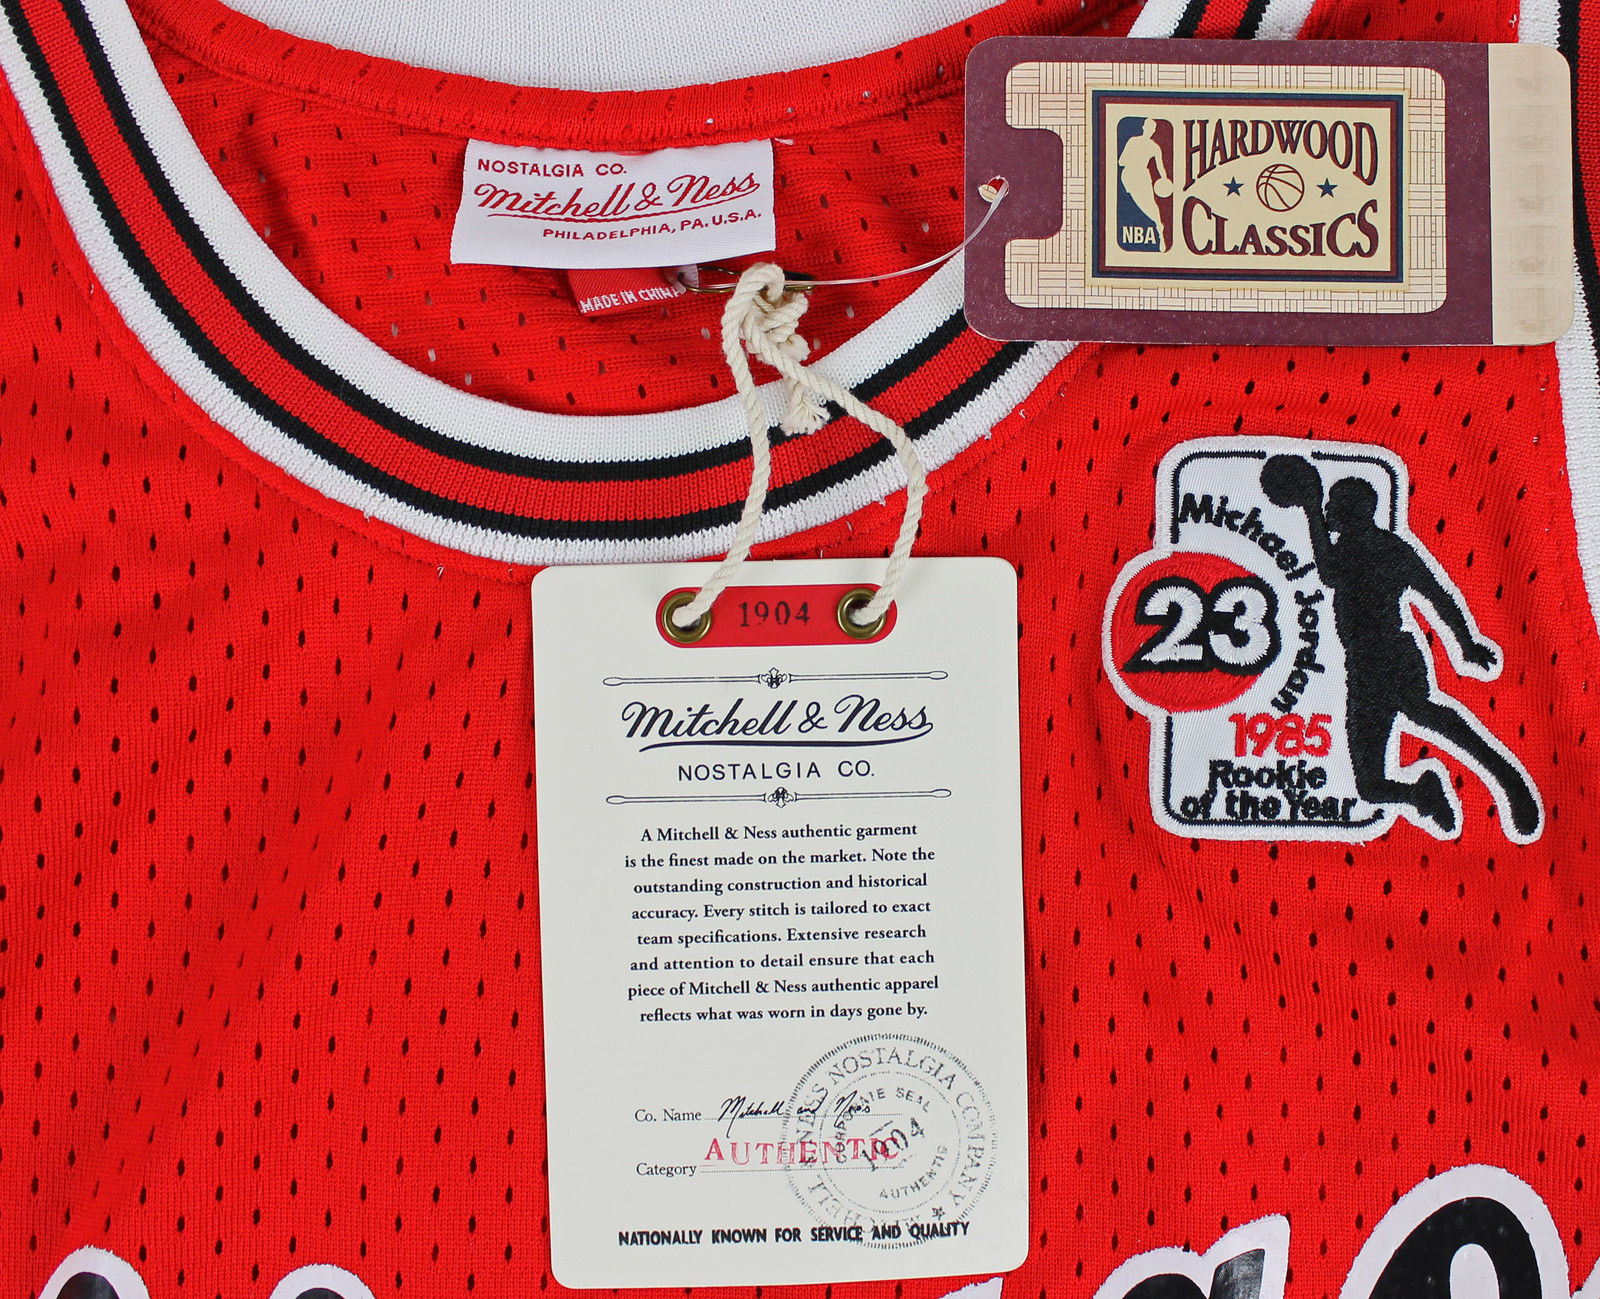 Michael Jordan Signed Limited Edition Authentic Mitchell & Ness